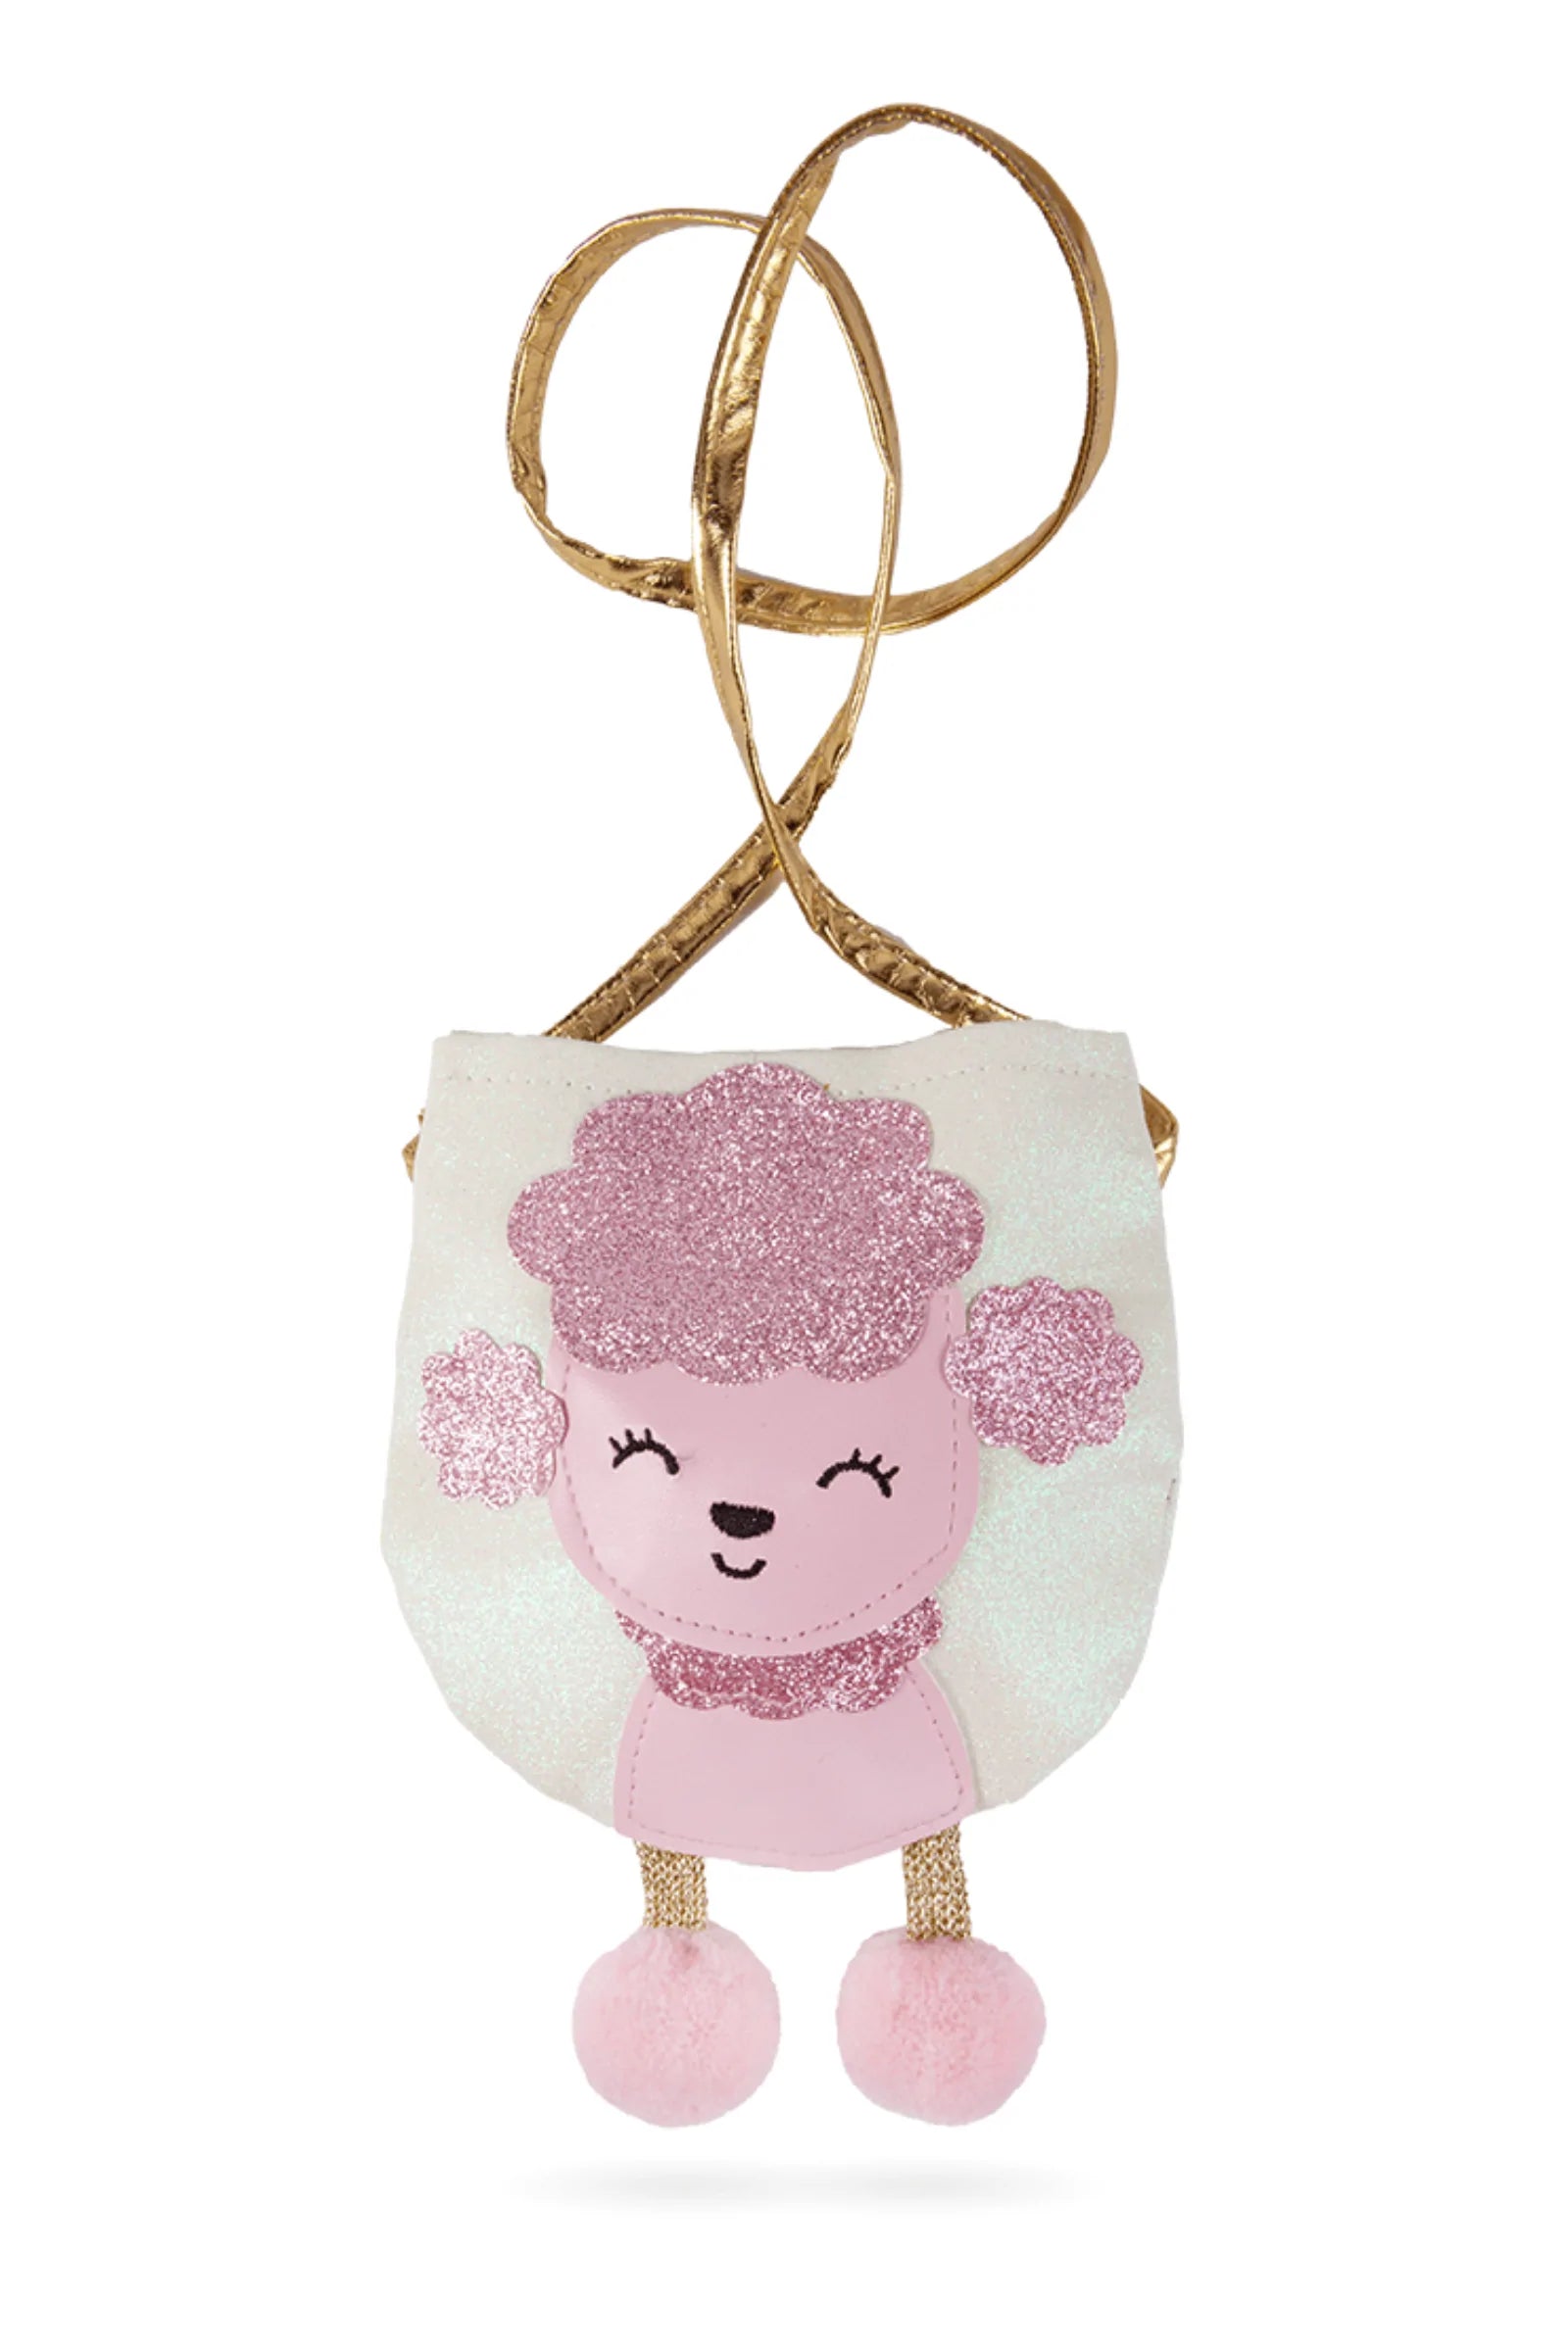 Bella the Poodle Petite Purse by Great Pretenders #83317